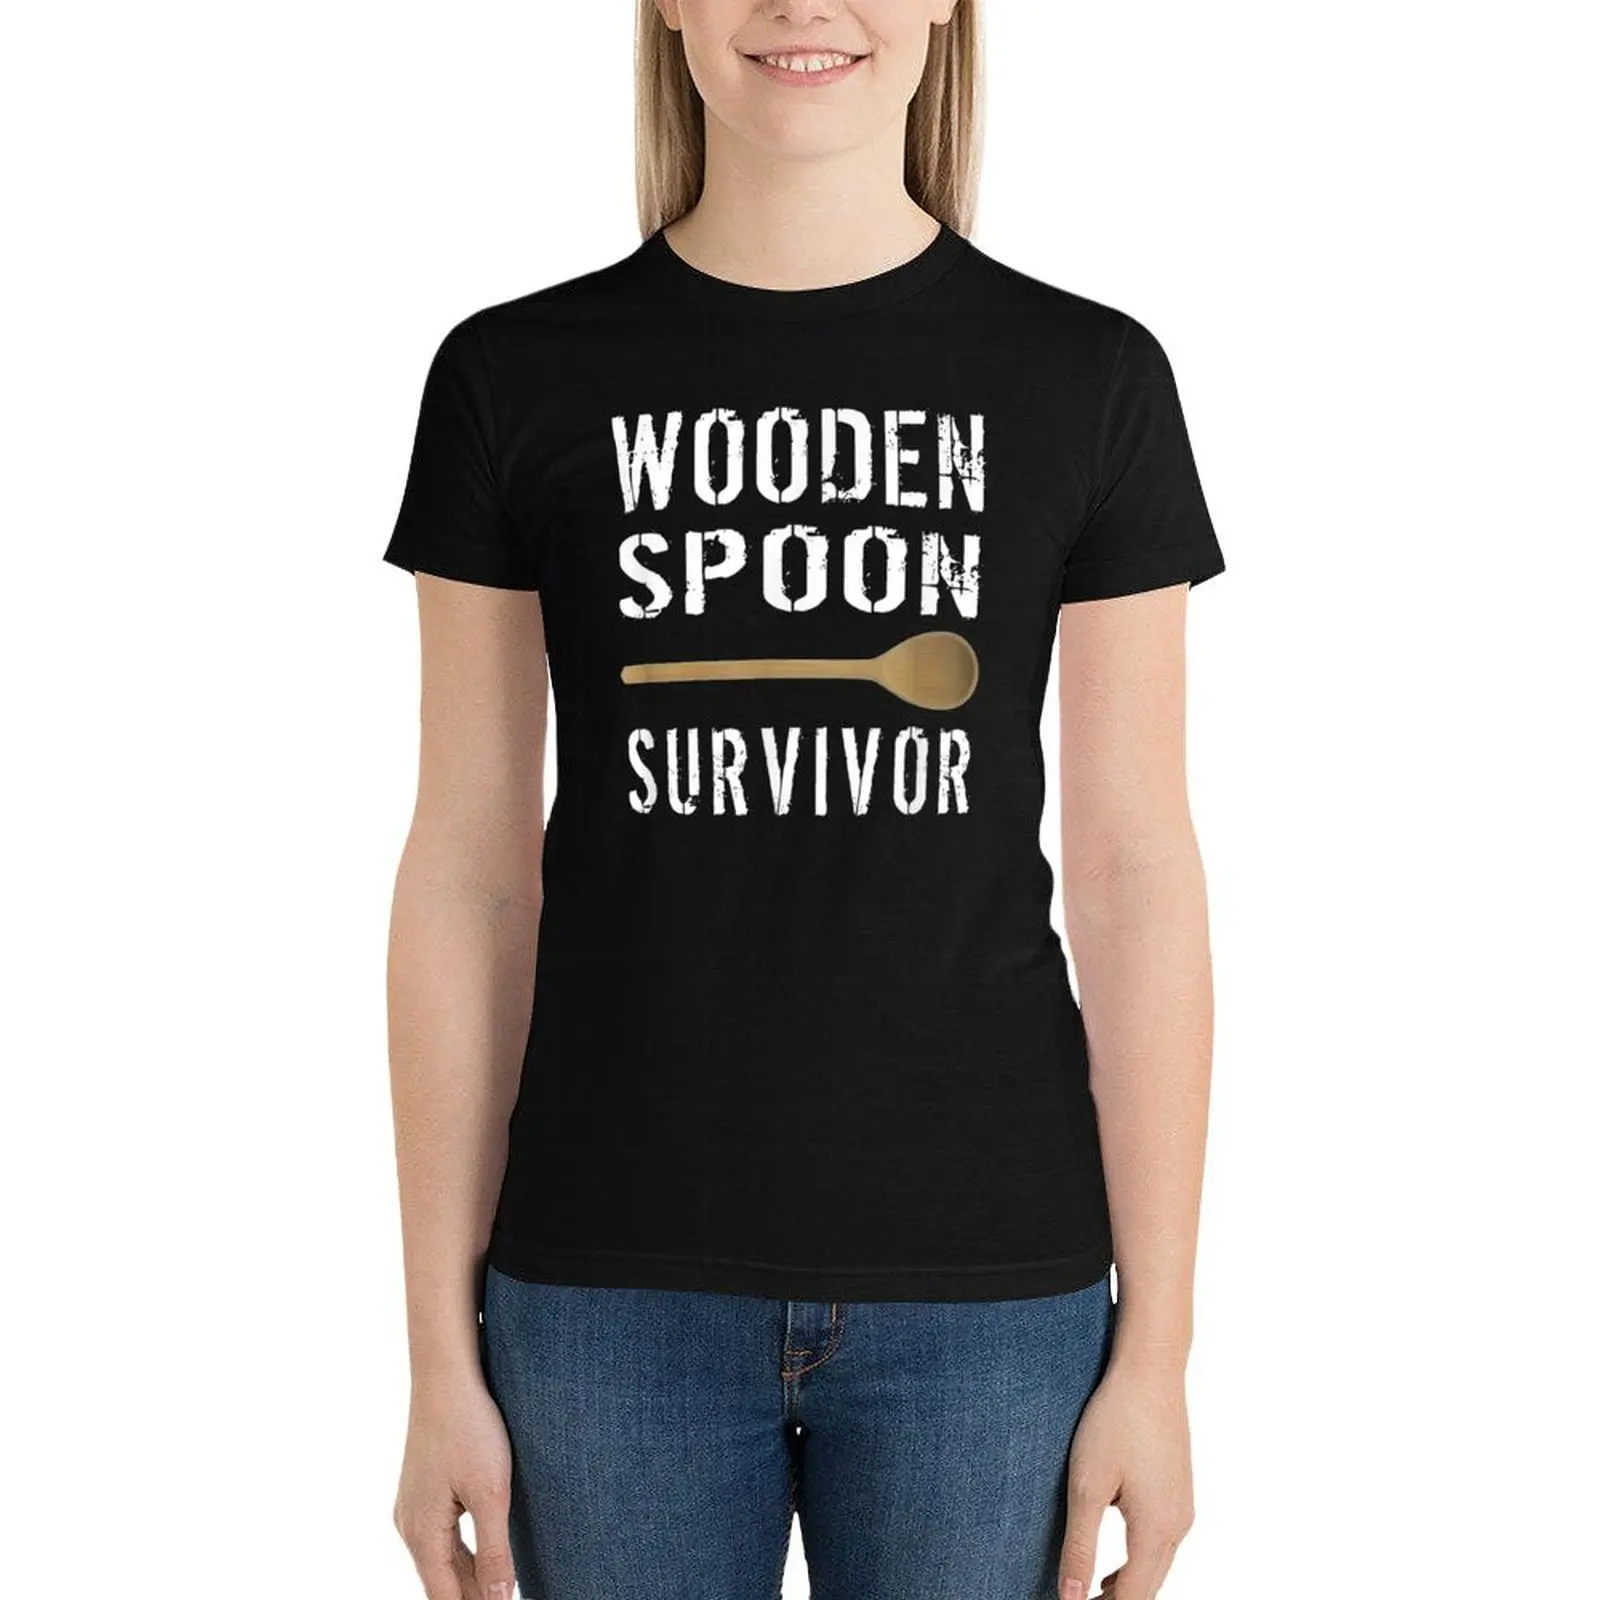 

Wooden Spoon Survivor T-Shirt Blouse shirts graphic tees plus size tops western t shirts for Women